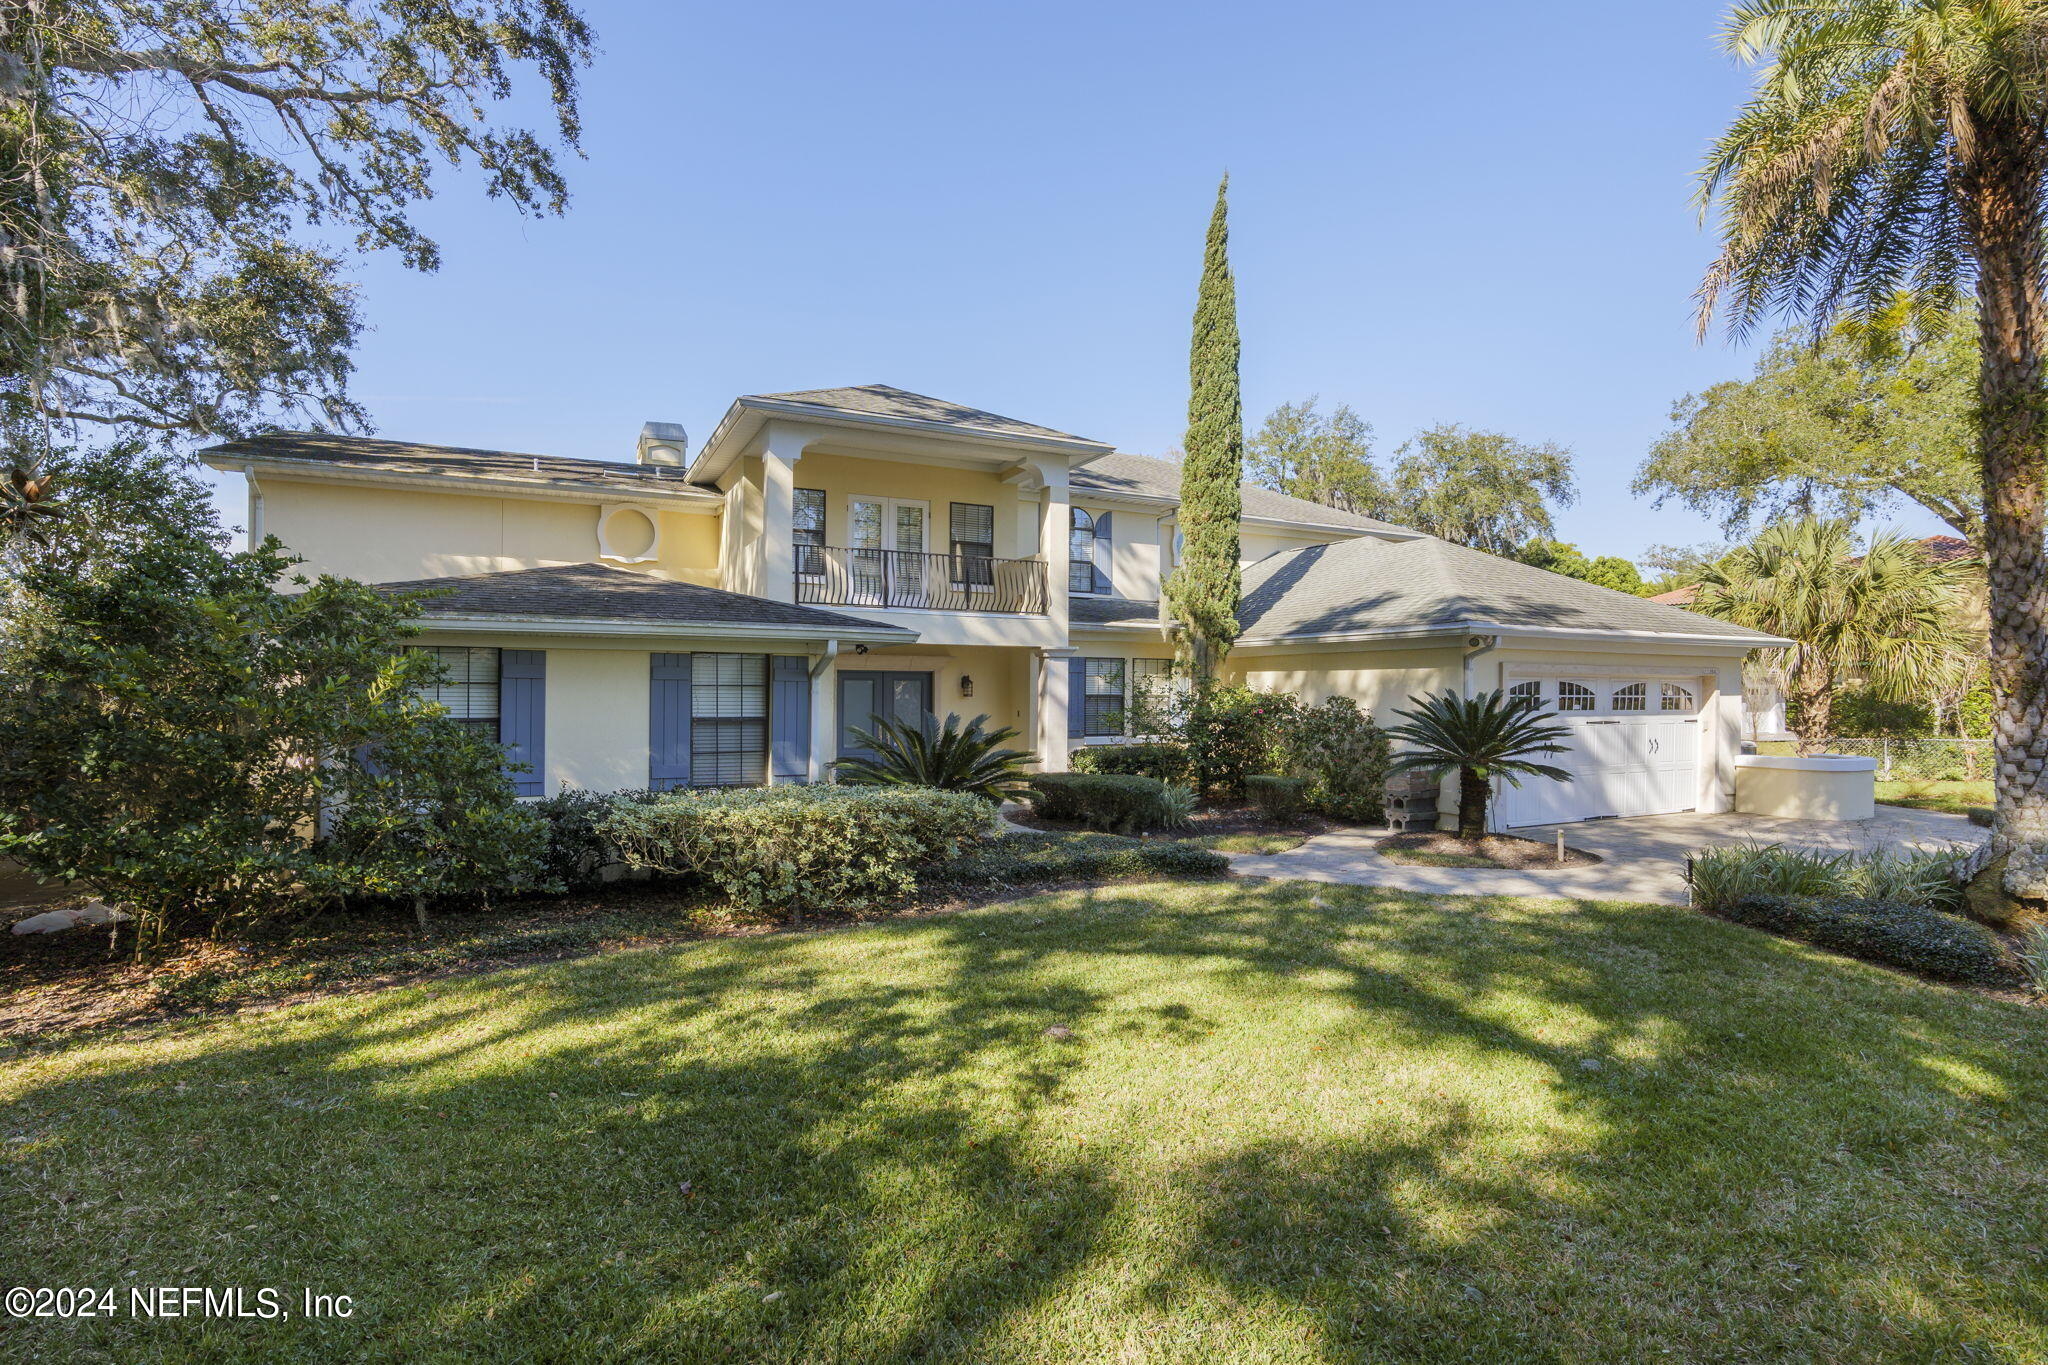 Jacksonville, FL home for sale located at 1204 JEAN Court, Jacksonville, FL 32207